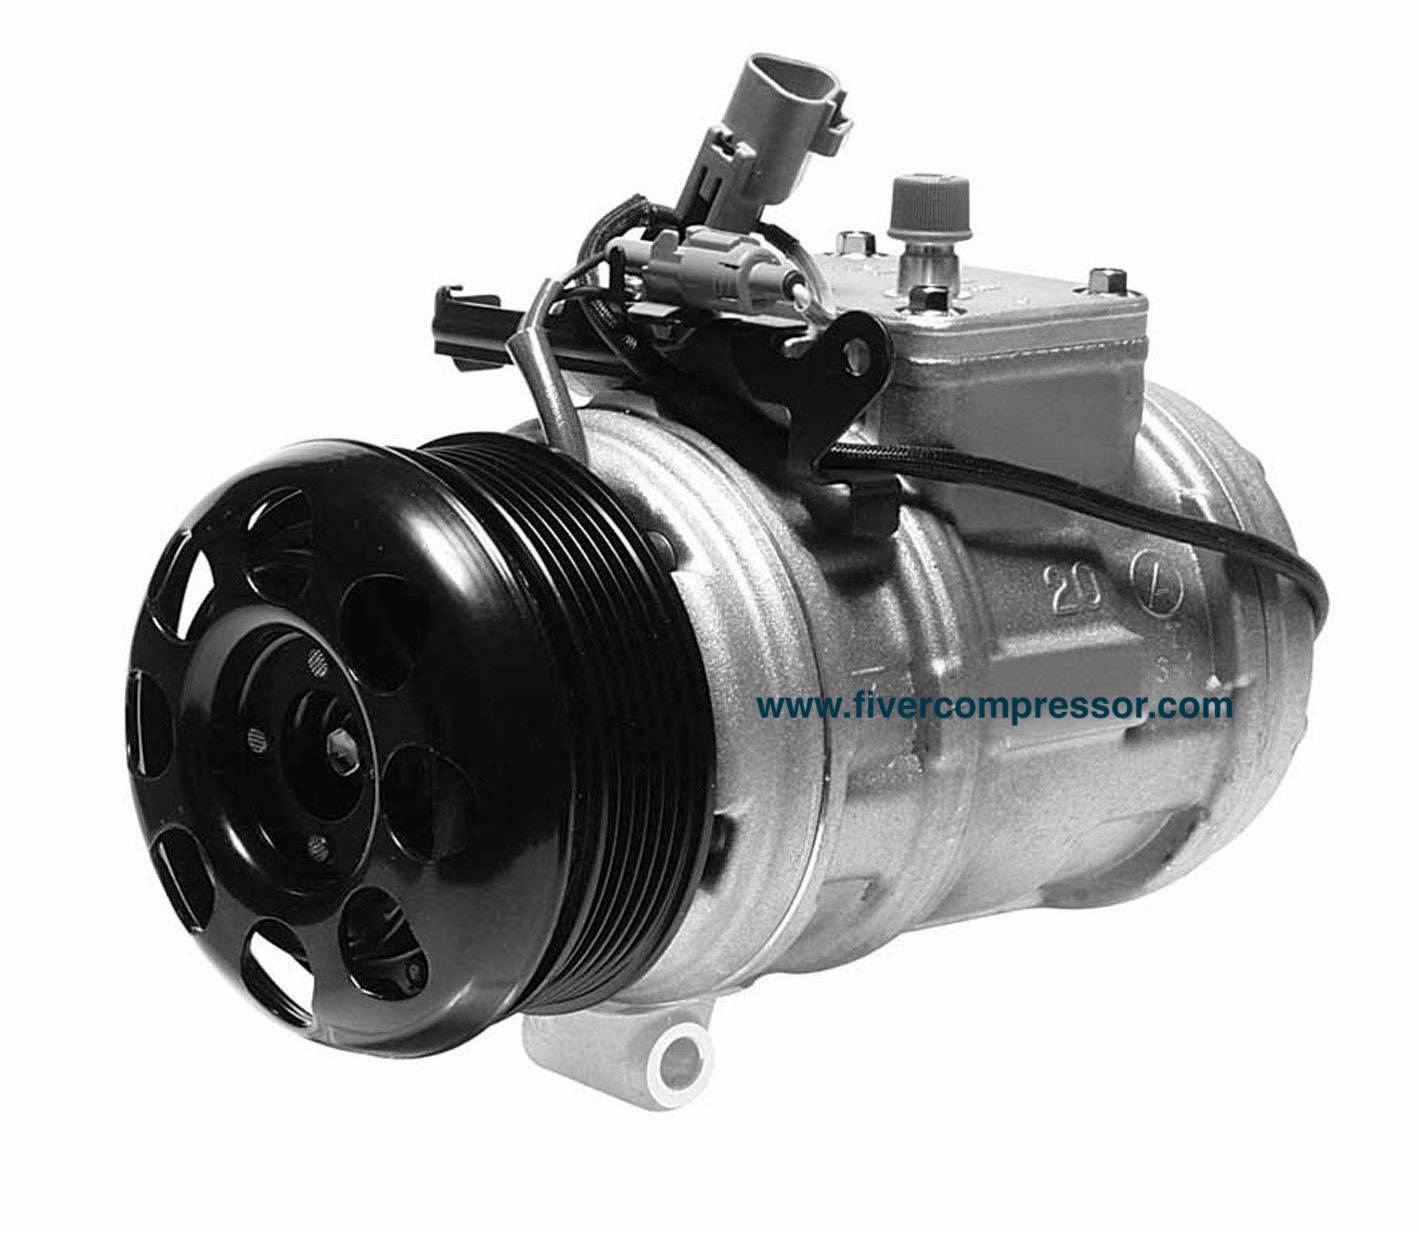 AC Compressor 8831050081, 8831050120, 8831050121, 8831060850, 8831060851, 8832050060, 8832050061, 8832050080, 8832050081, 8832060680, 8832060681 for Lexus LS400 LX470 and Toyota Land Cruiser